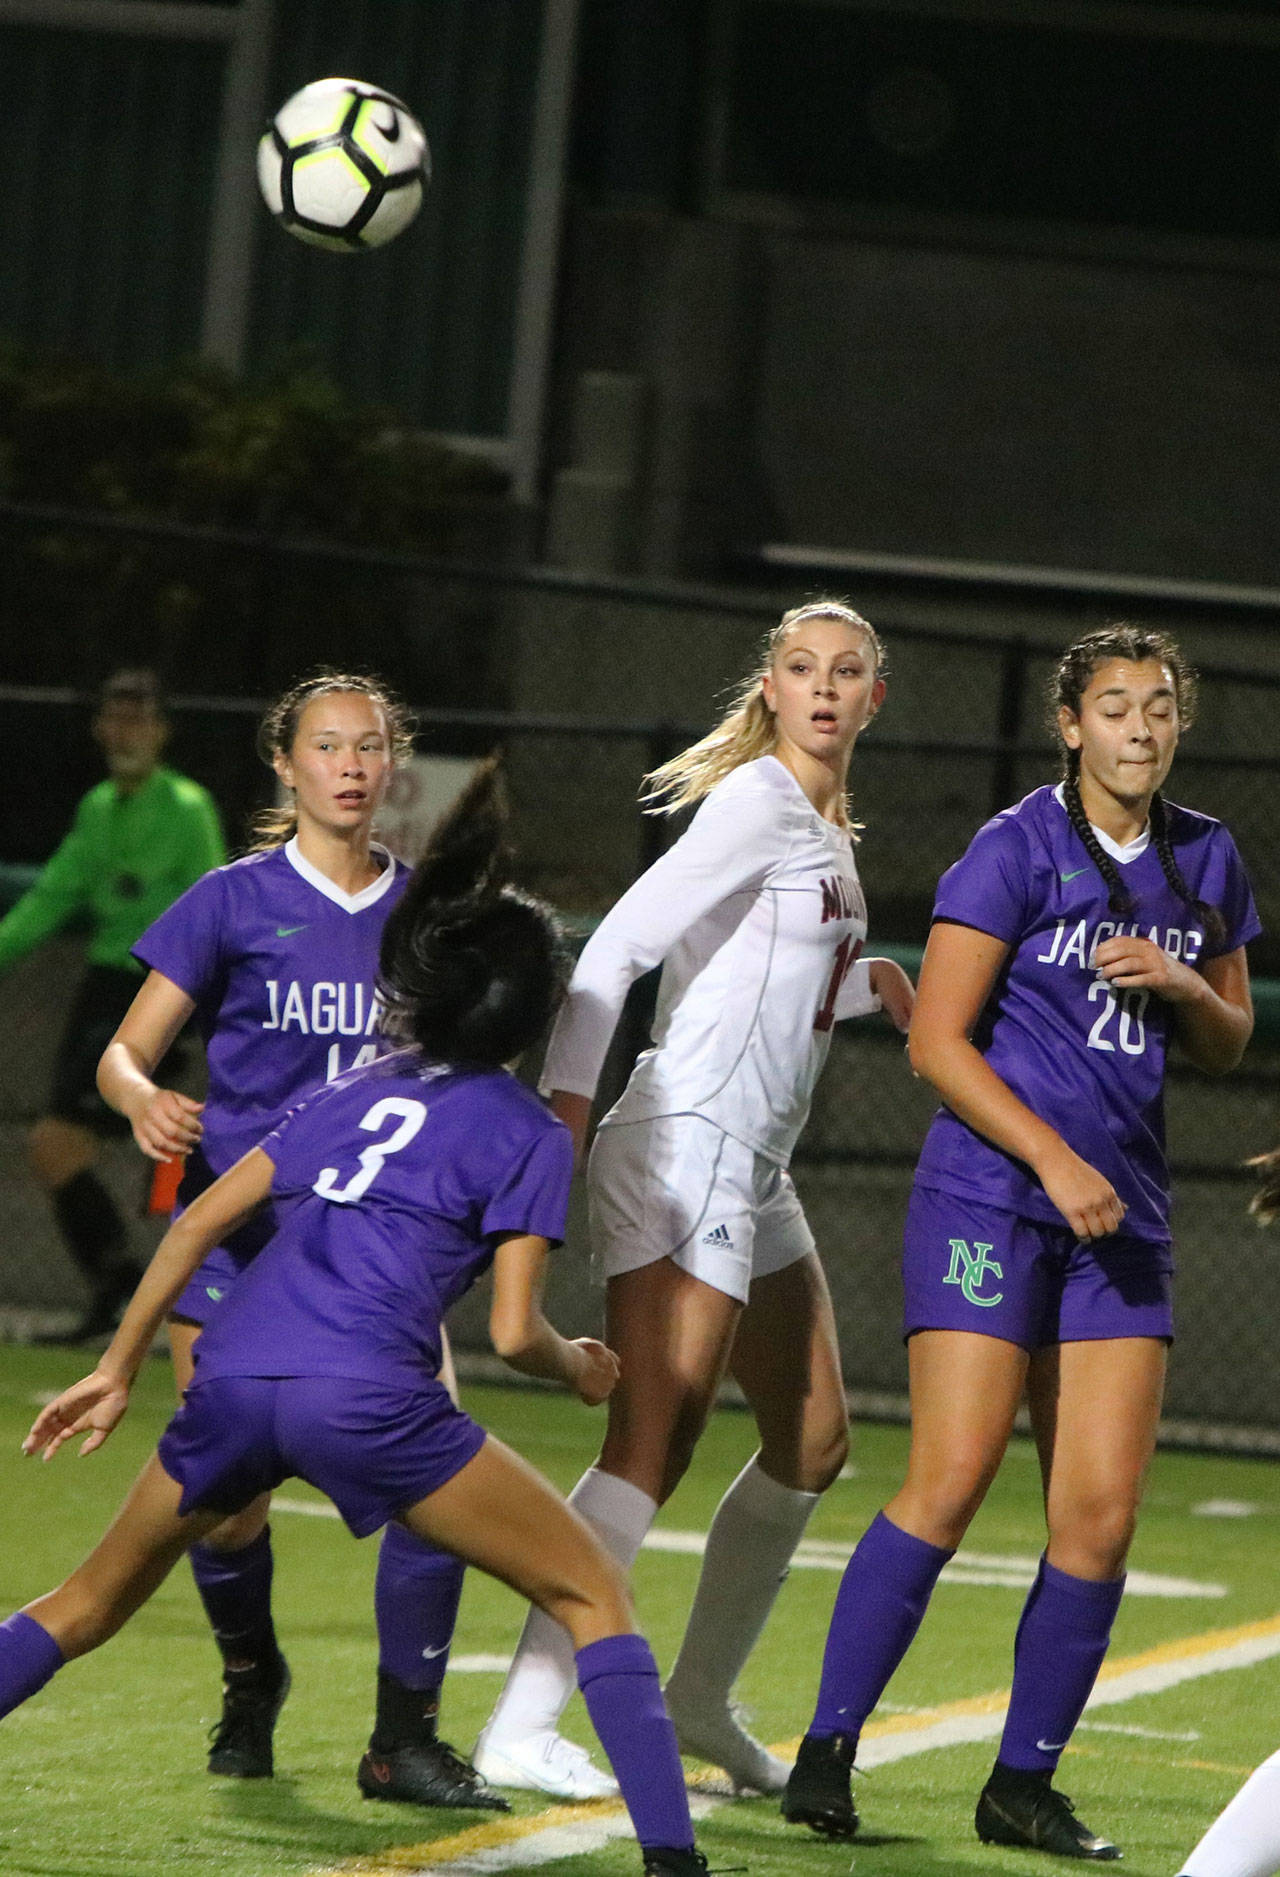 Mount Si’s Joelle Buck, middle in white jersey, was selected to the 4A All-State Girls Soccer first team by the Washington State Soccer Coaches Association. The four-year varsity defensive starter played in every game on the schedule — 58 — during her time with the program. She played a total of 4,721 minutes, only missing nine minutes, and was an integral part of a defense that in four years took Mount Si’s goals-against average from 3.2 (2016) to 1.8 (2019). The Pacific Lutheran University soccer signee was also a four-year varsity basketball player and carries a 3.85 cumulative grade-point average. Andy Nystrom/ staff photo